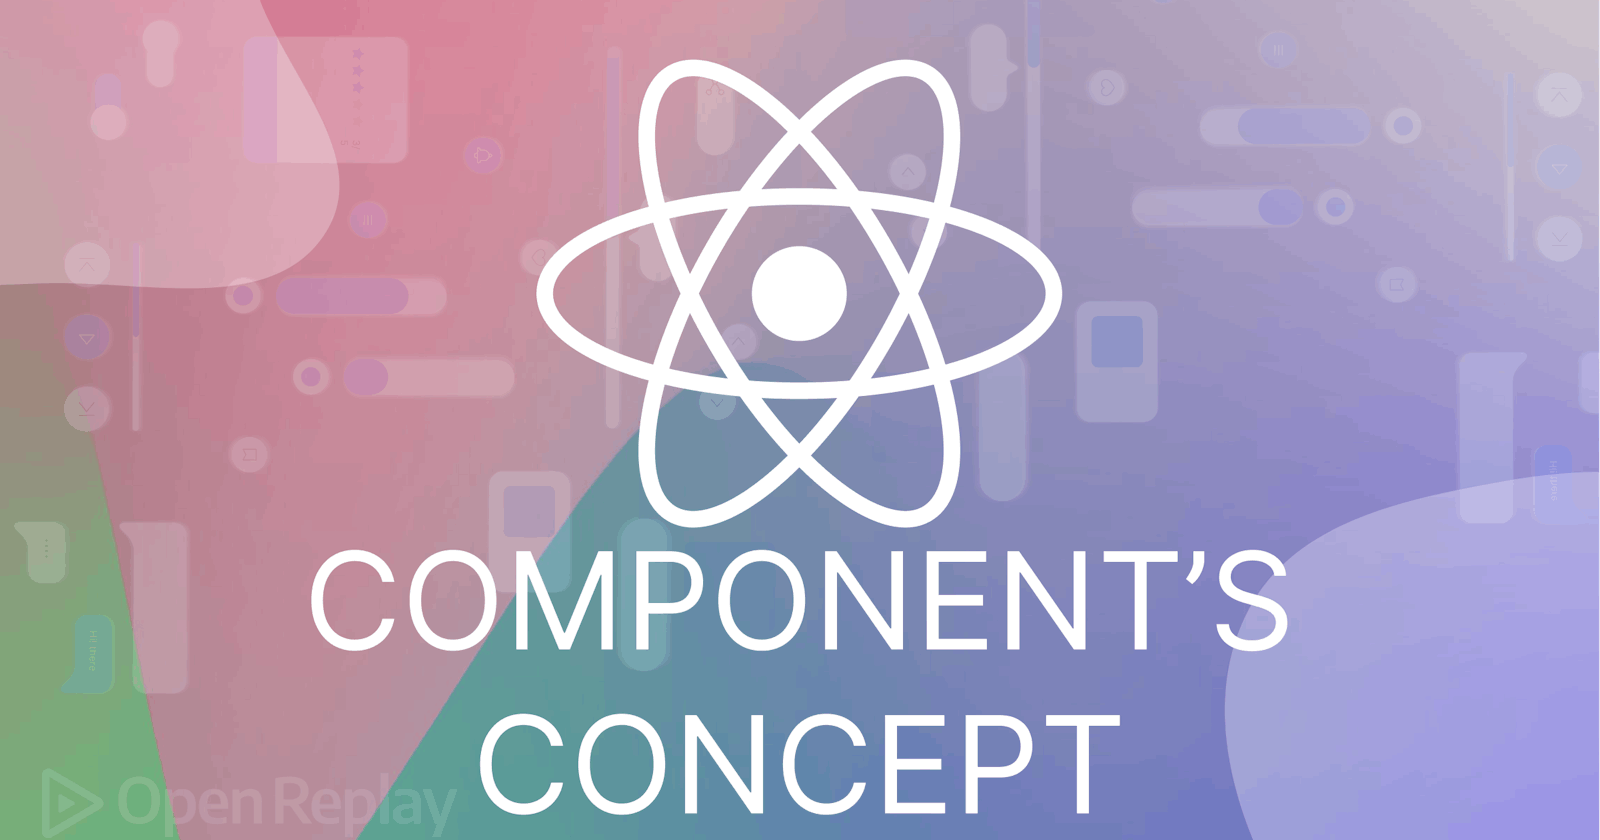 React's Layout Component's Concept